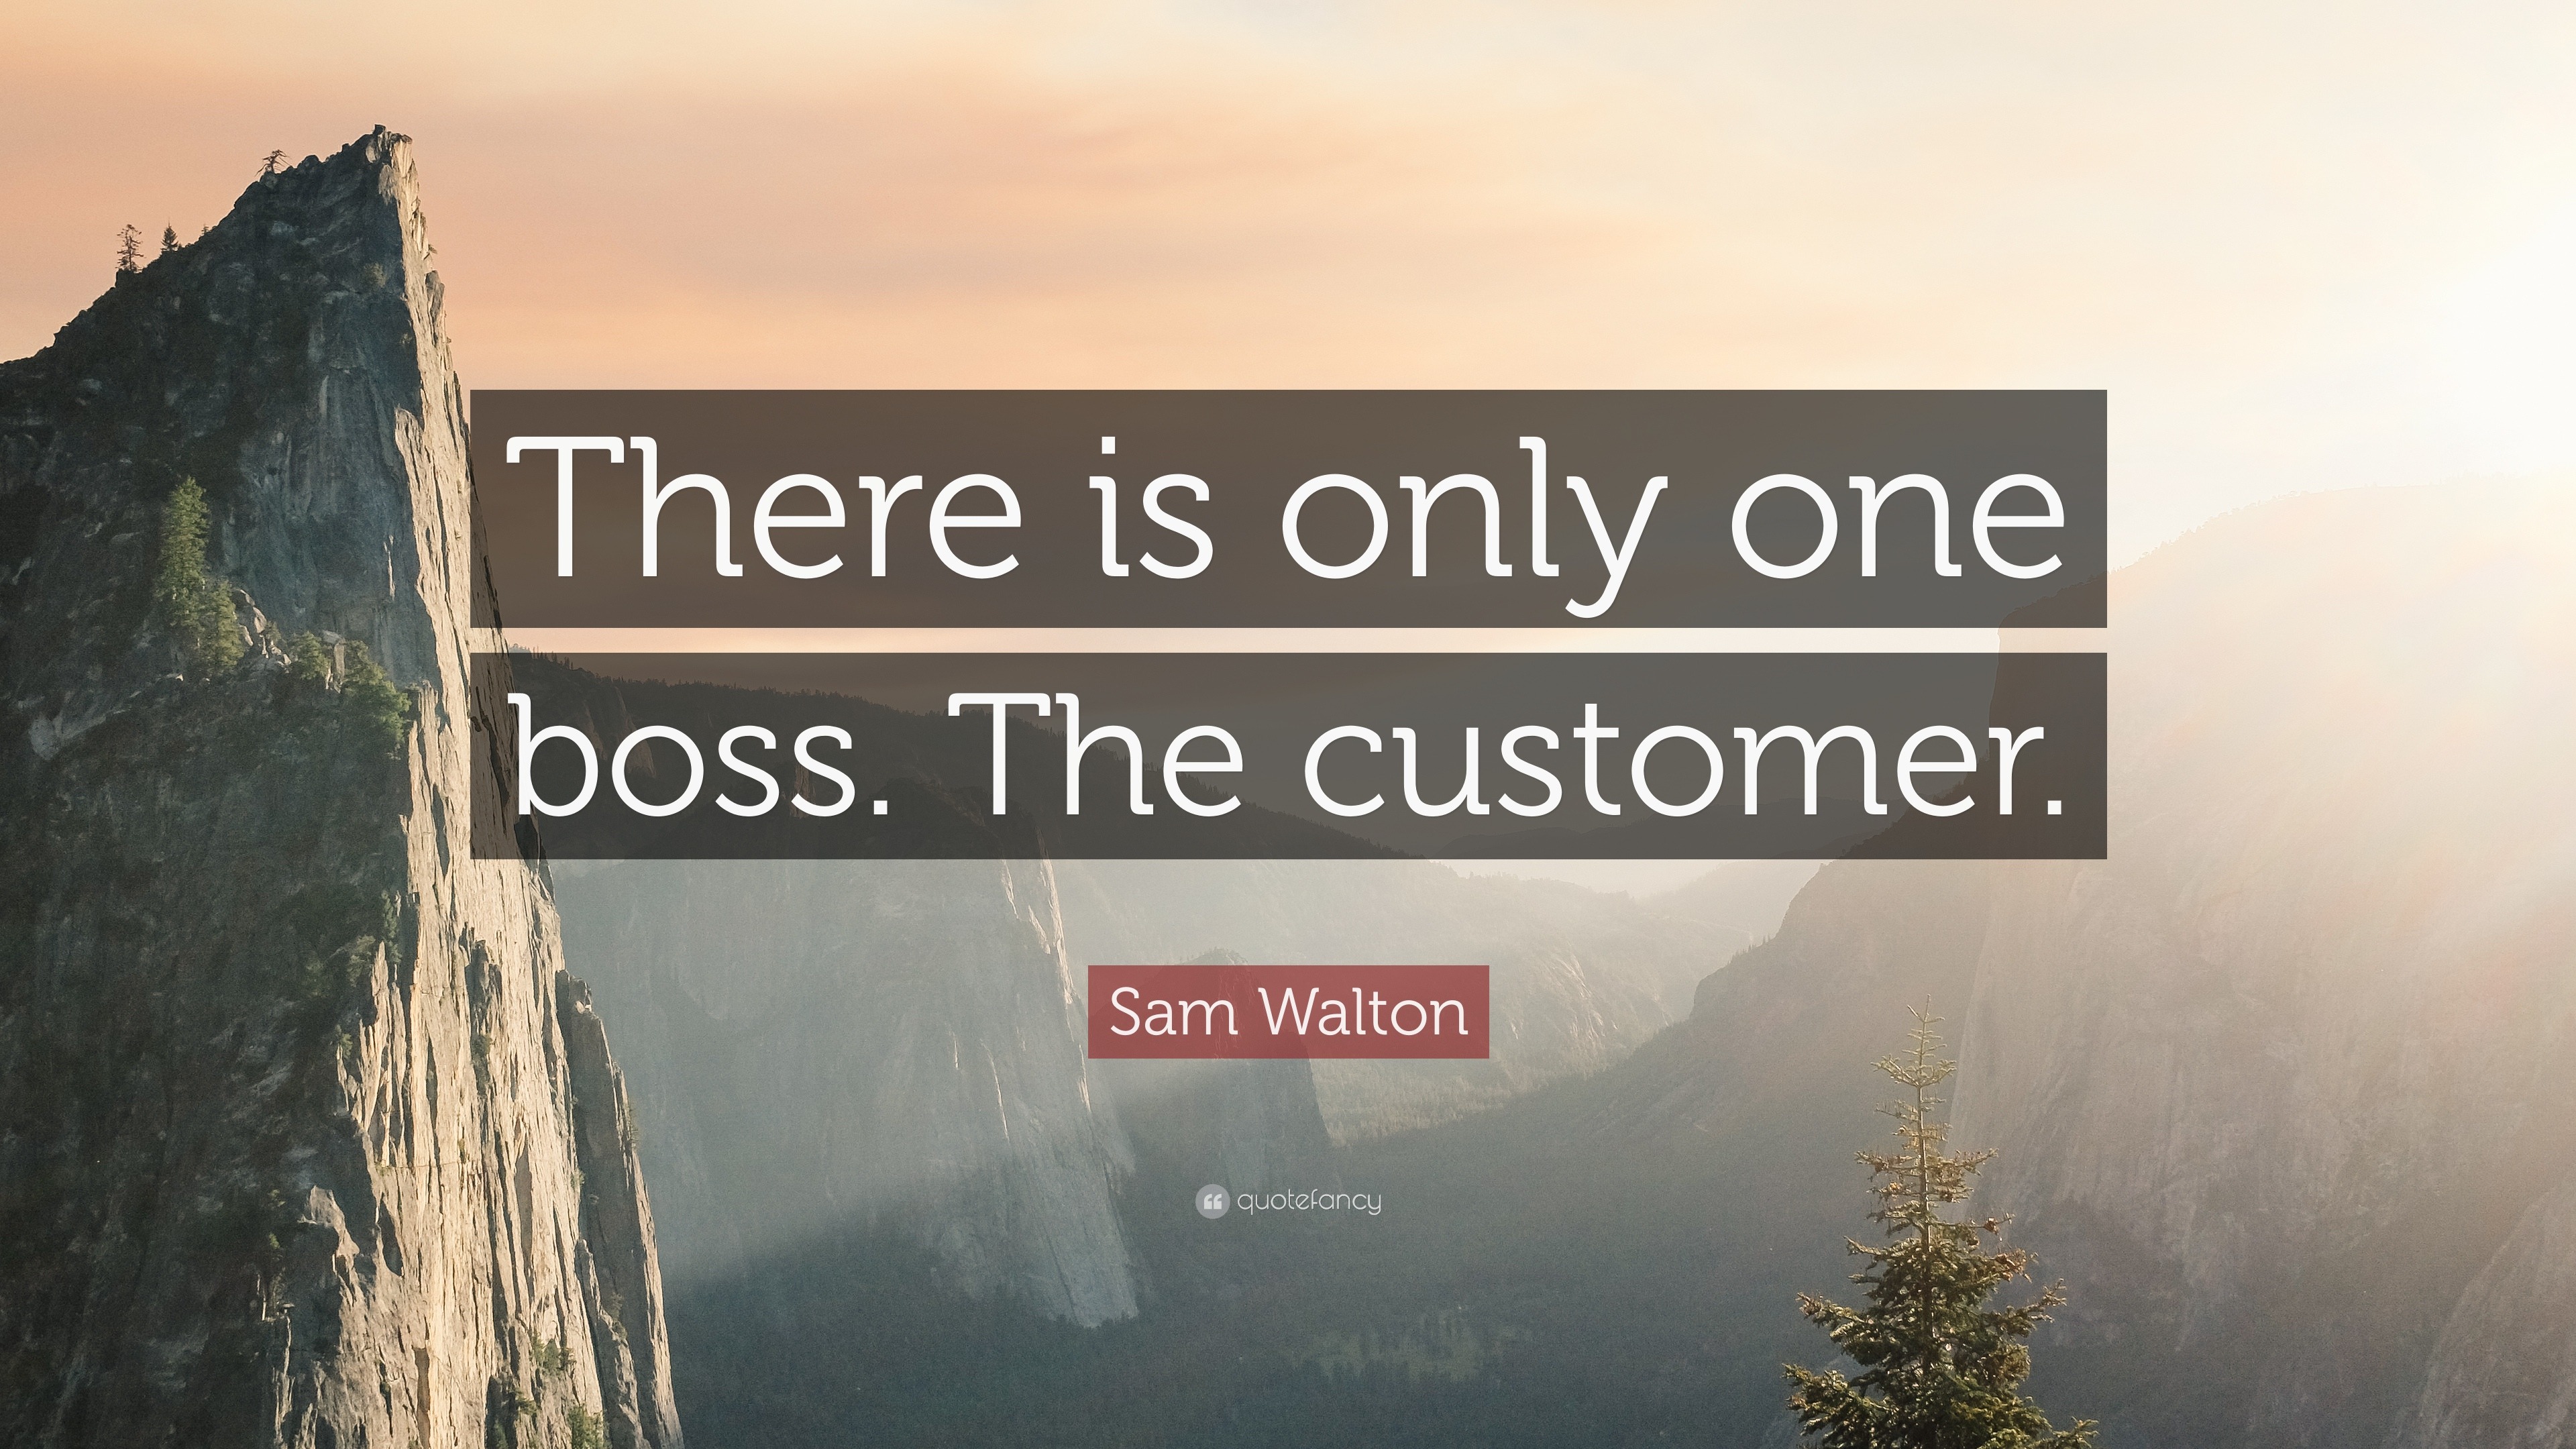 Sam Walton Quote: “There is only one The customer.”